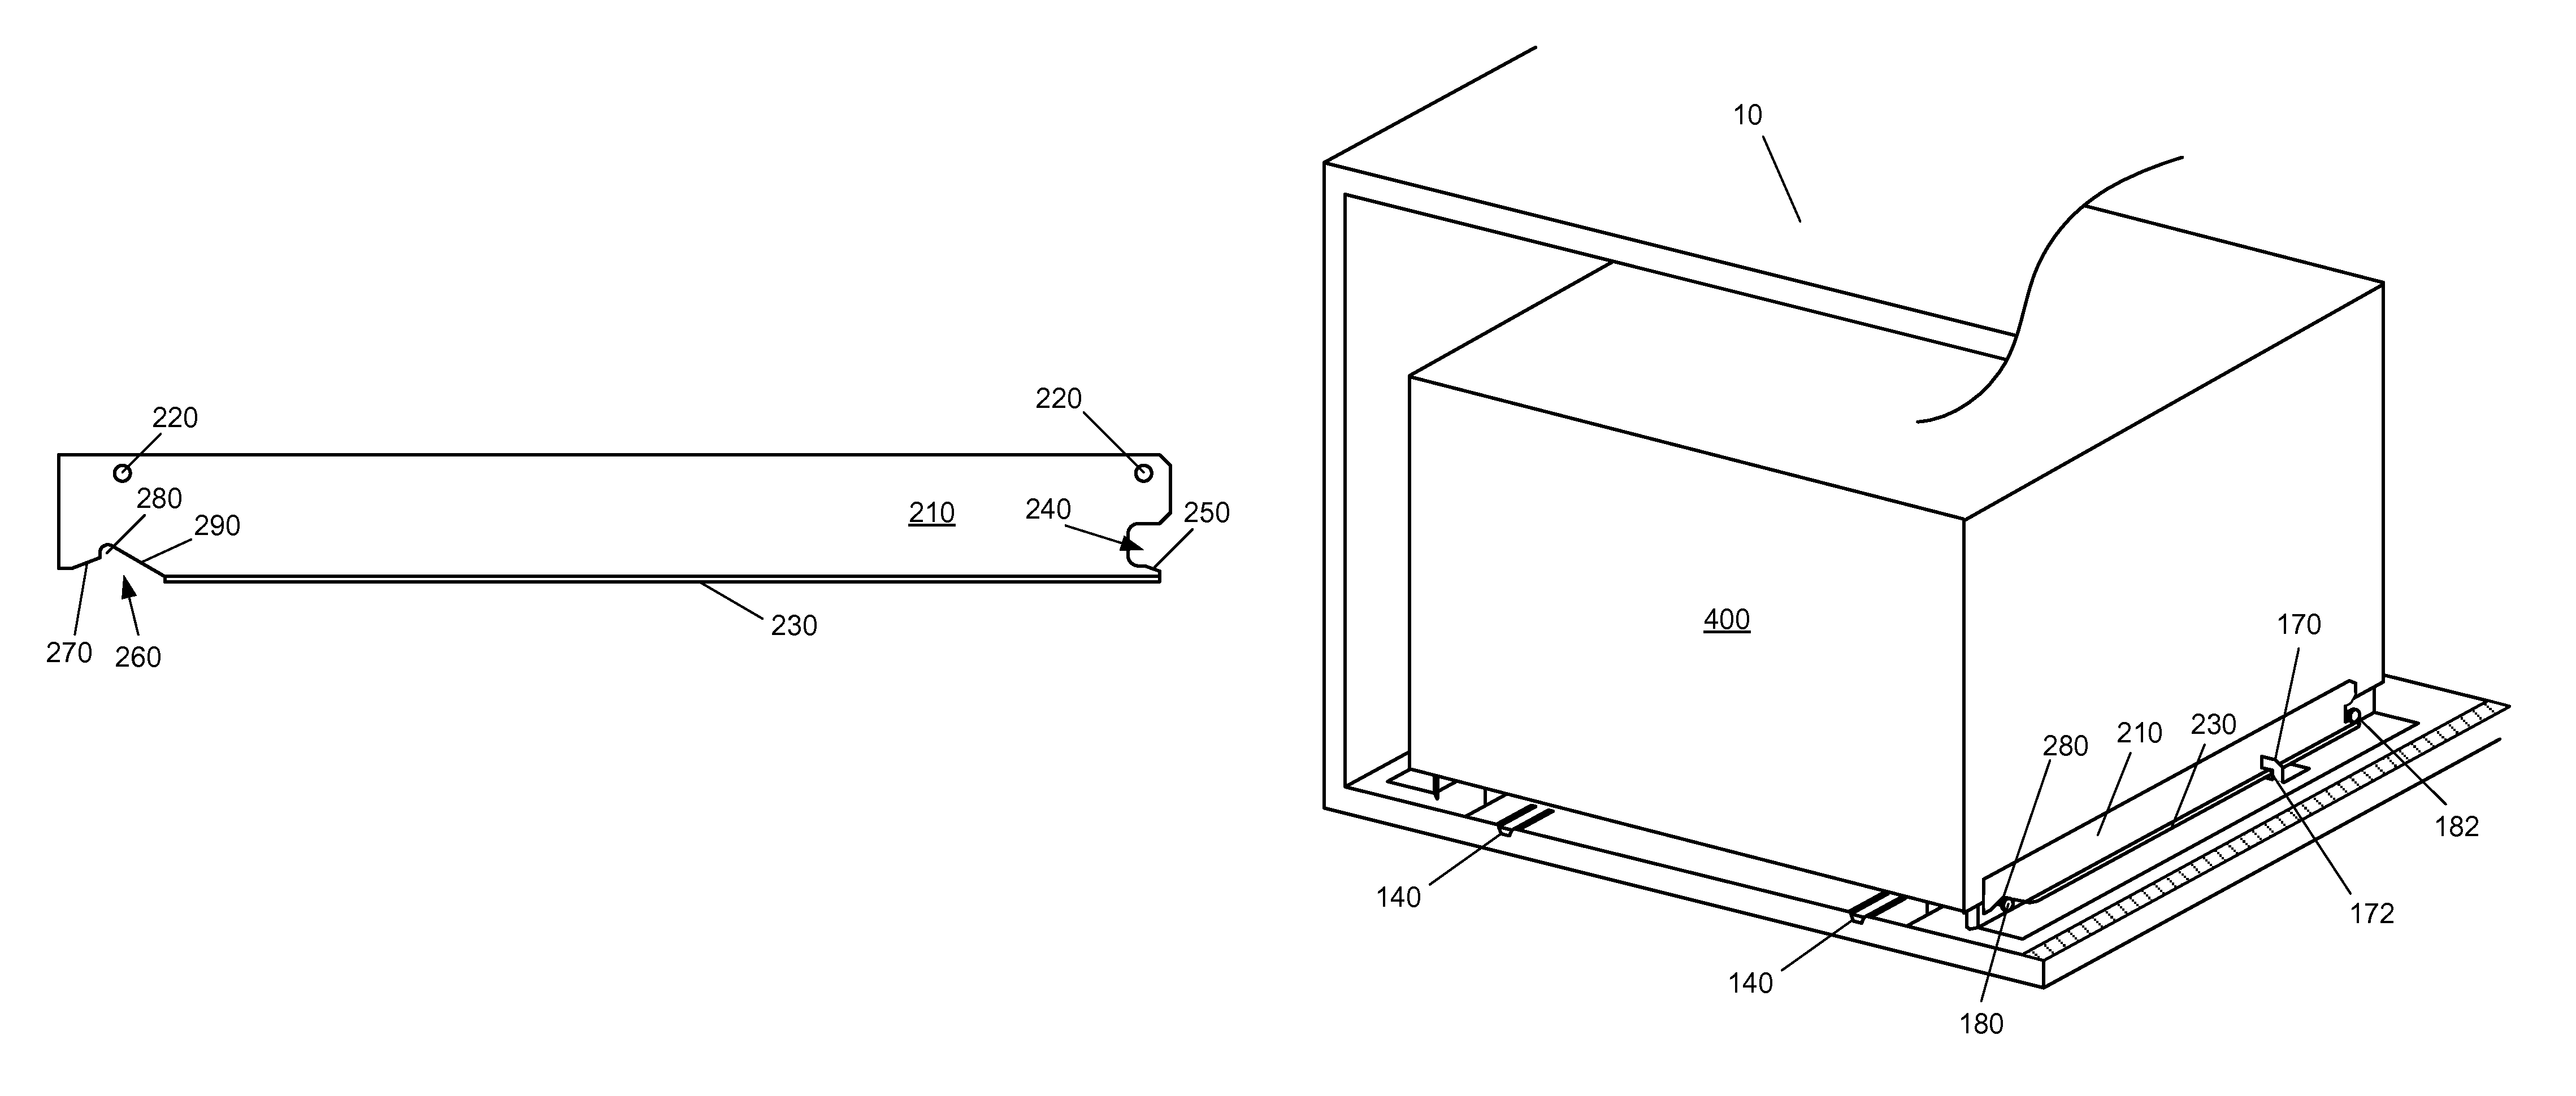 Attachment rail system for household appliance